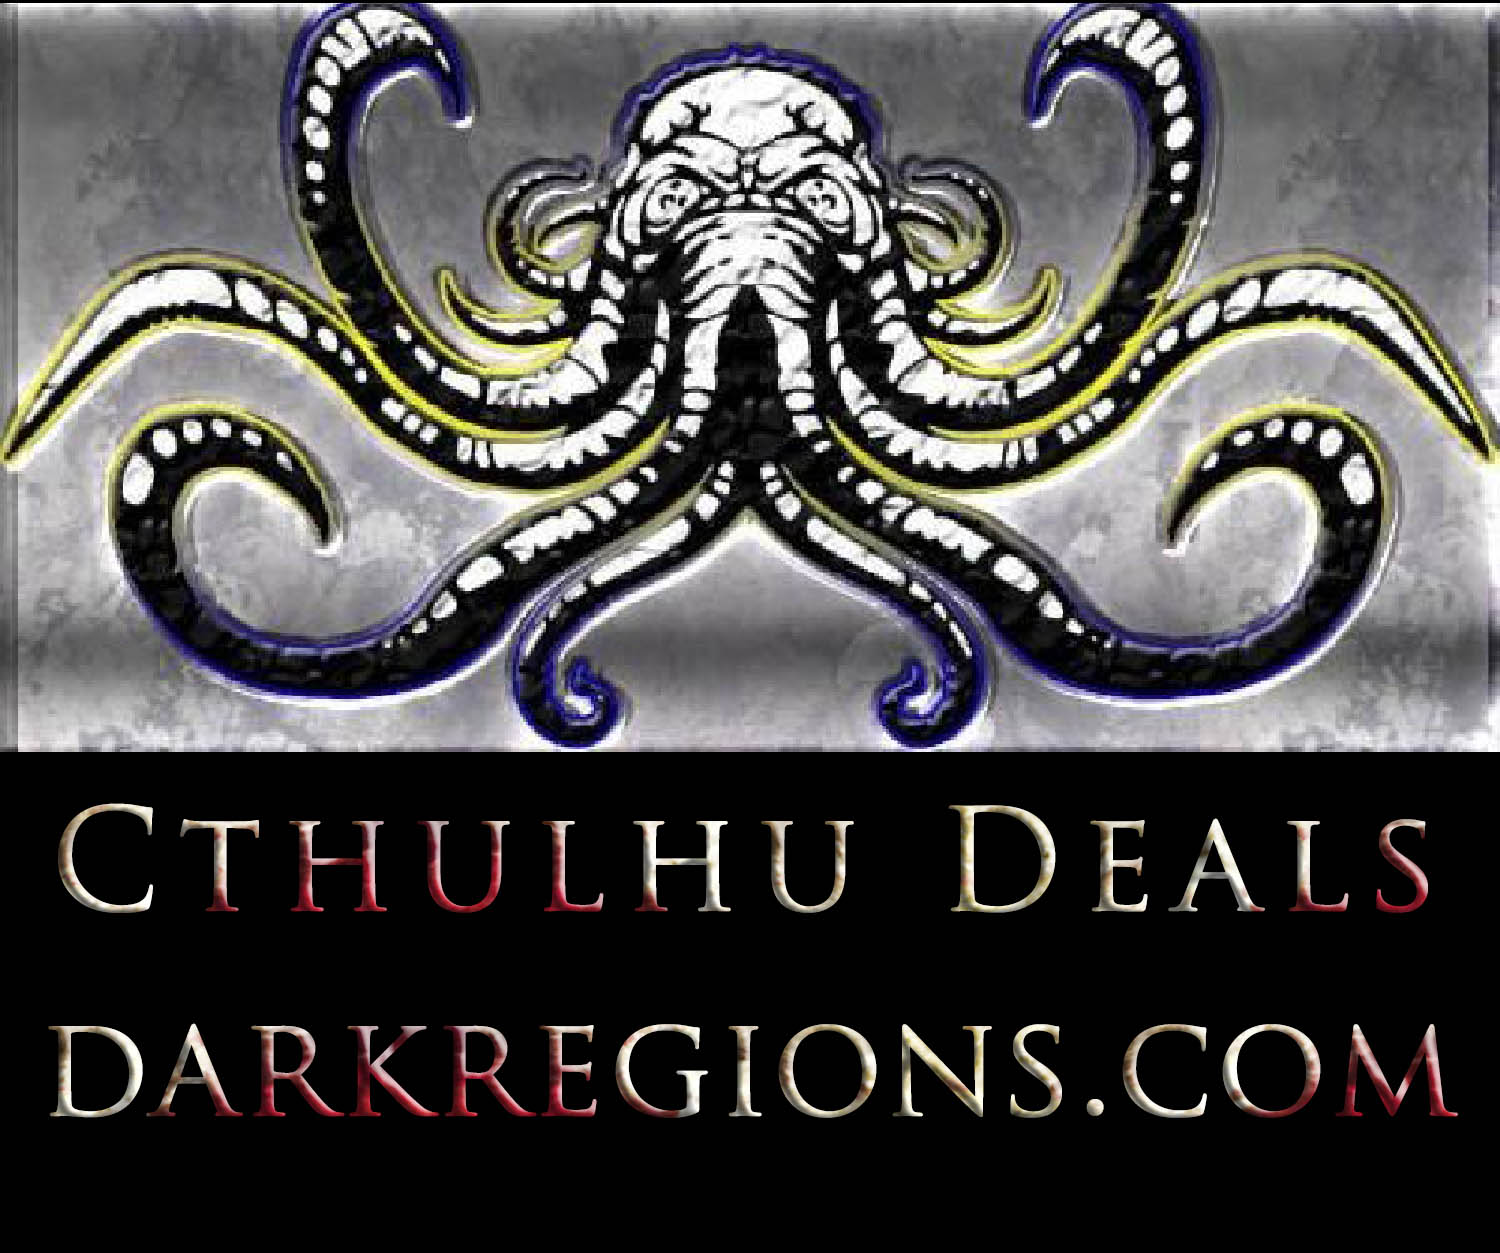 🦑 Cthulhu Fhtagn! Lovecraftian and Cosmic Horror Specials and Offerings!